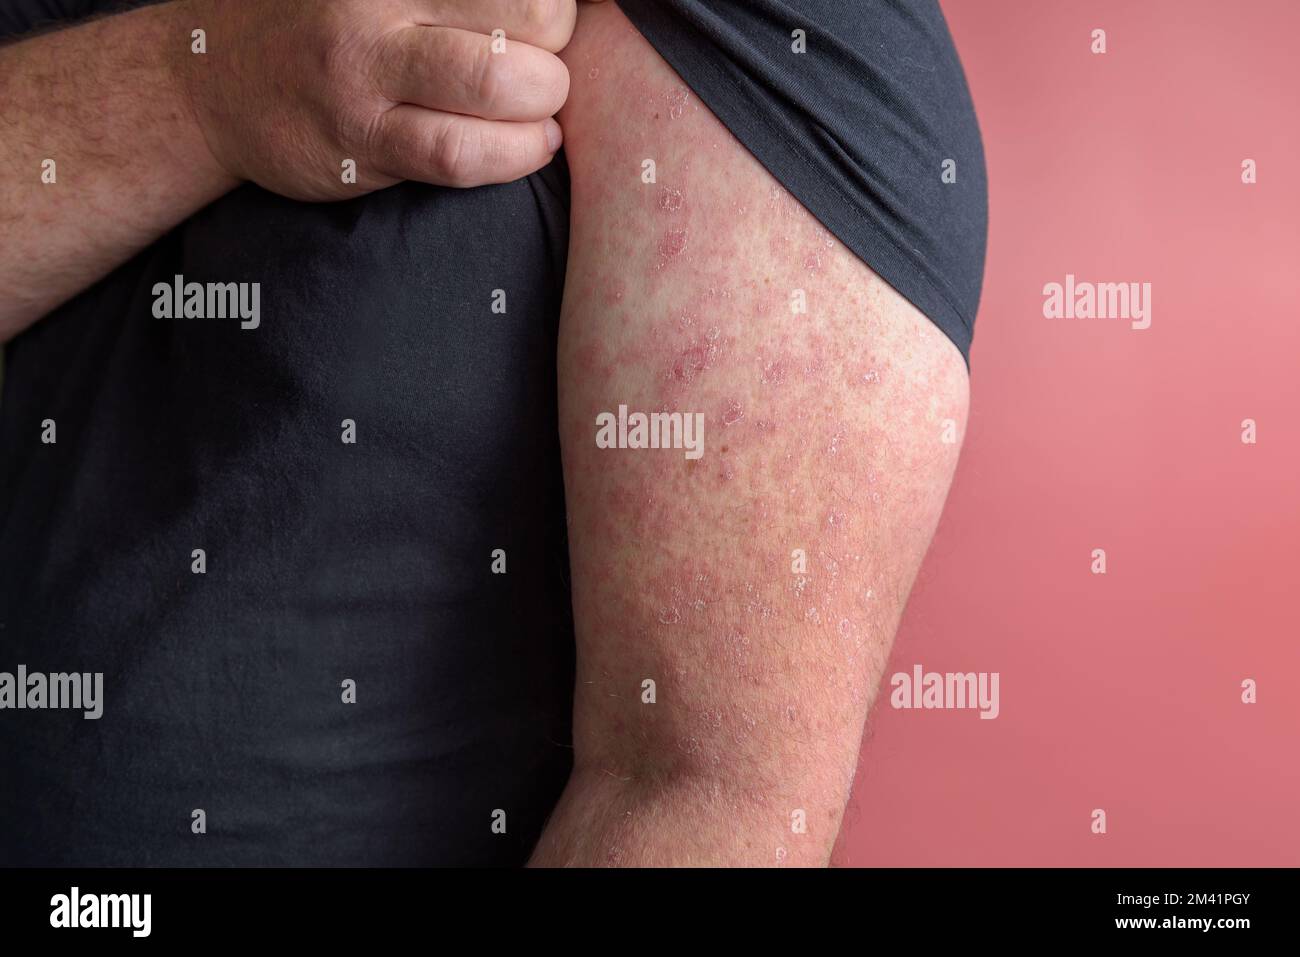 Erysipelas Red rash appears on the forearm. Close up Stock Photo